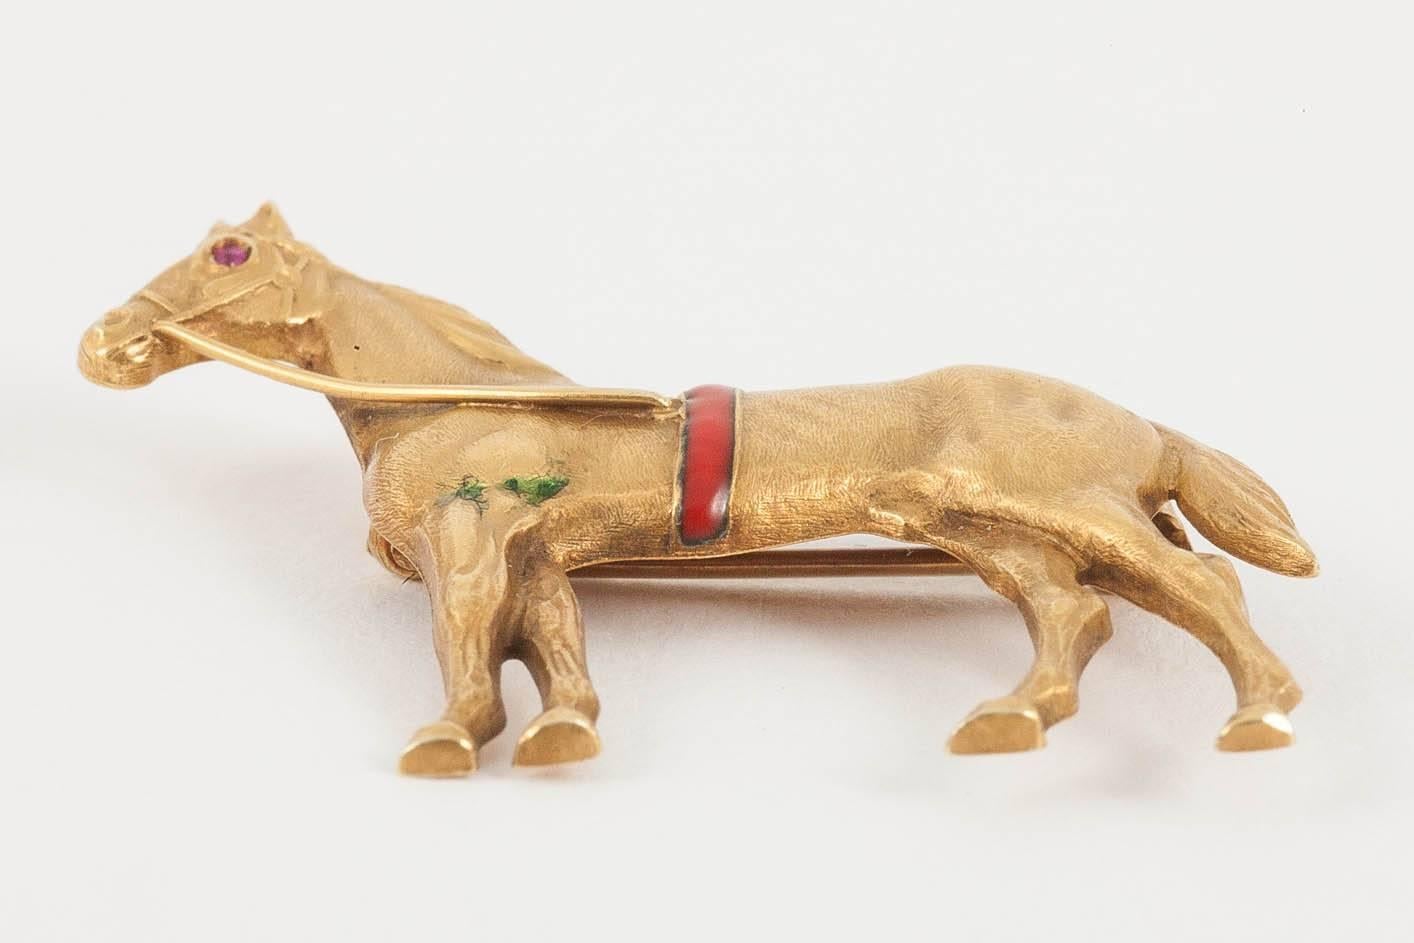 Antique equestrian brooch of a standing racehorse in 14 karat yellow gold set with a ruby eye and a red enamel band around its girth. Single pin fastening.
Measures 32mm in height x 35mm in length.
Antique piece (over 100 years old).
Early 20th